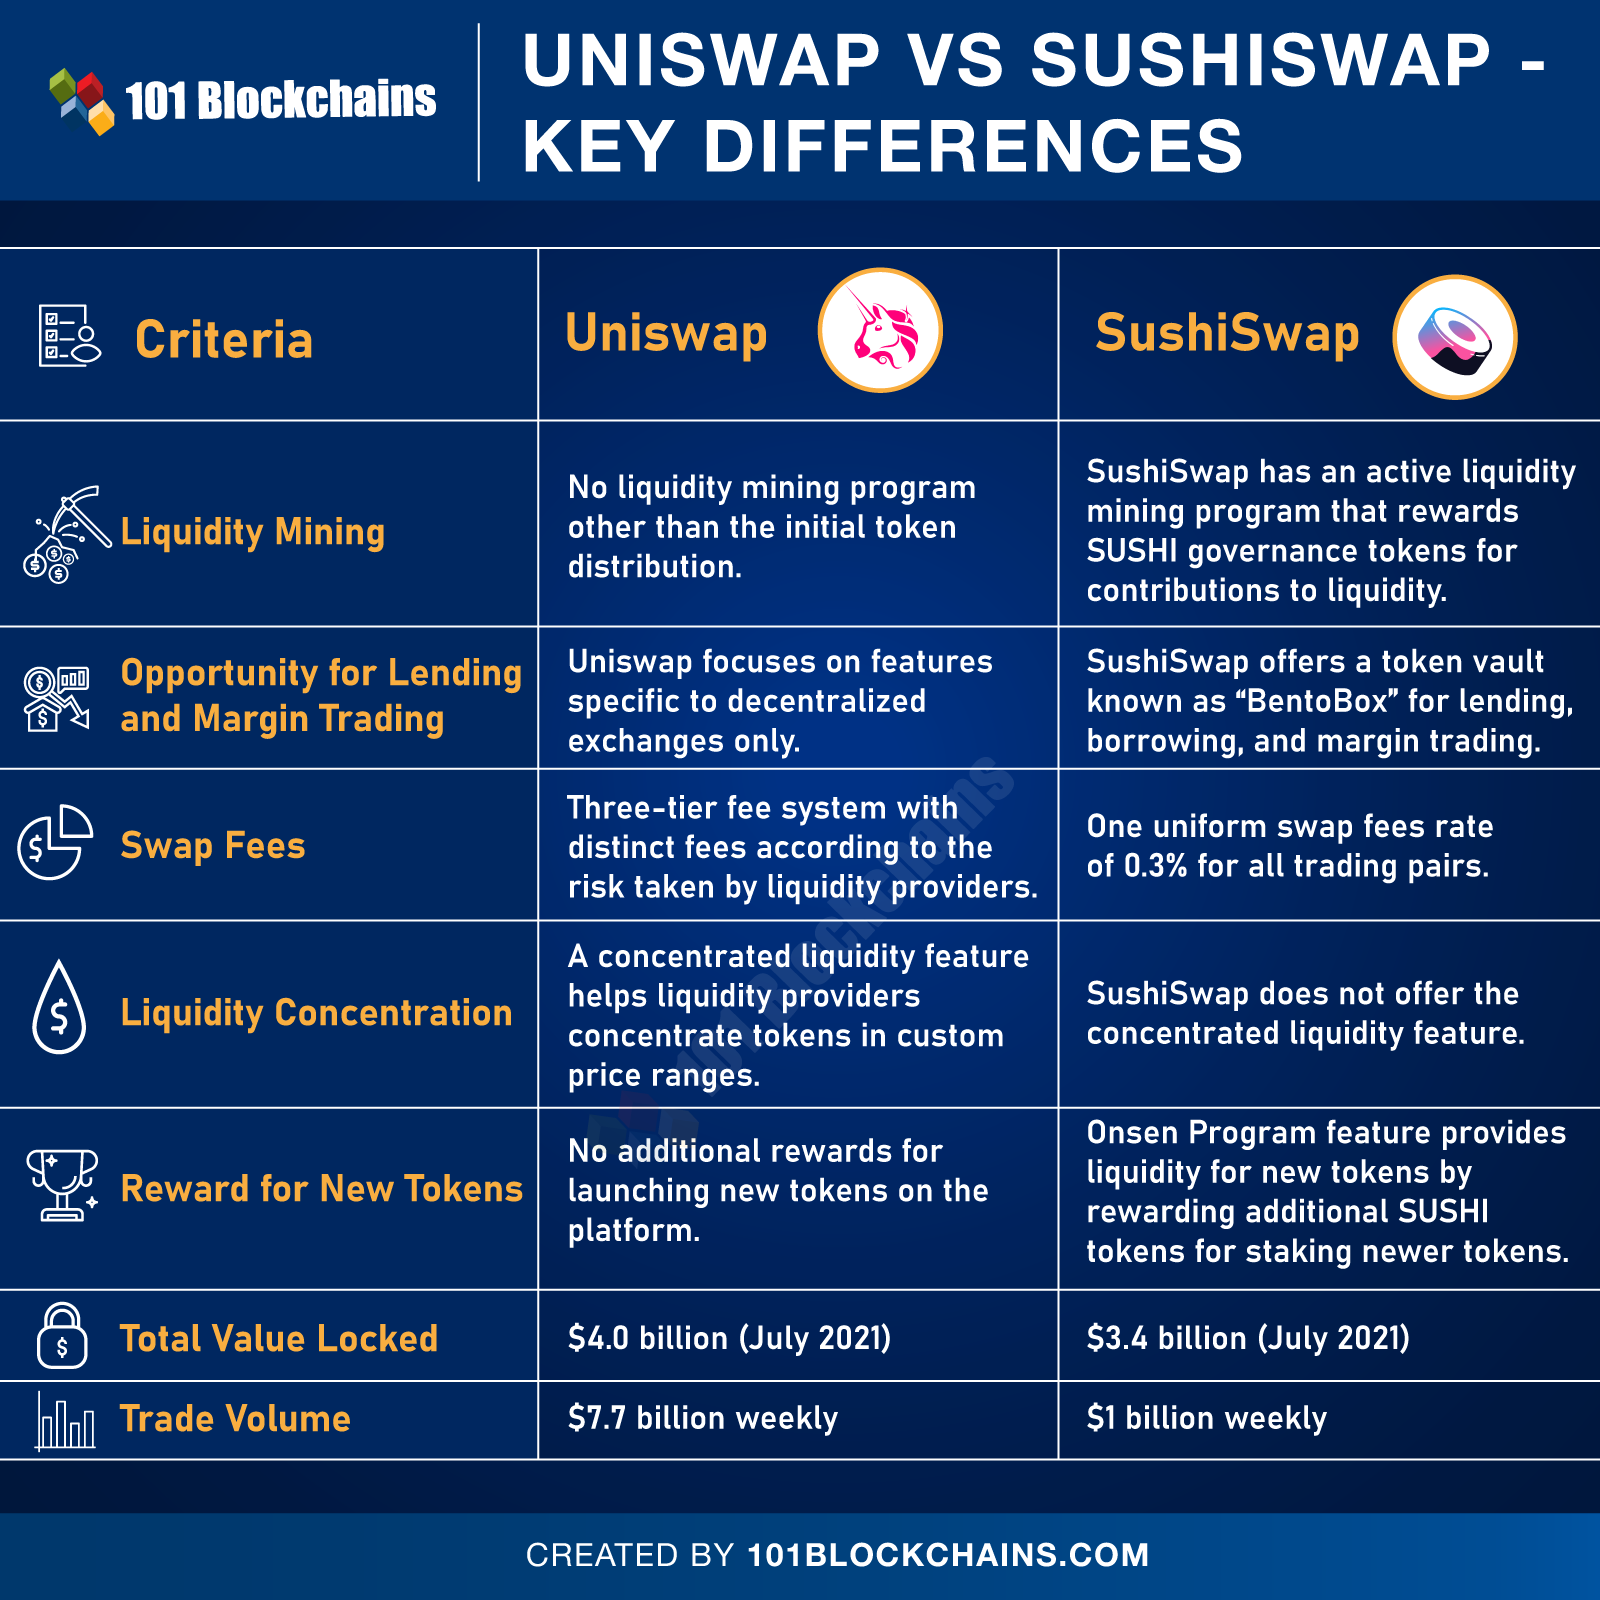 Difference Between Uniswap and SushiSwap